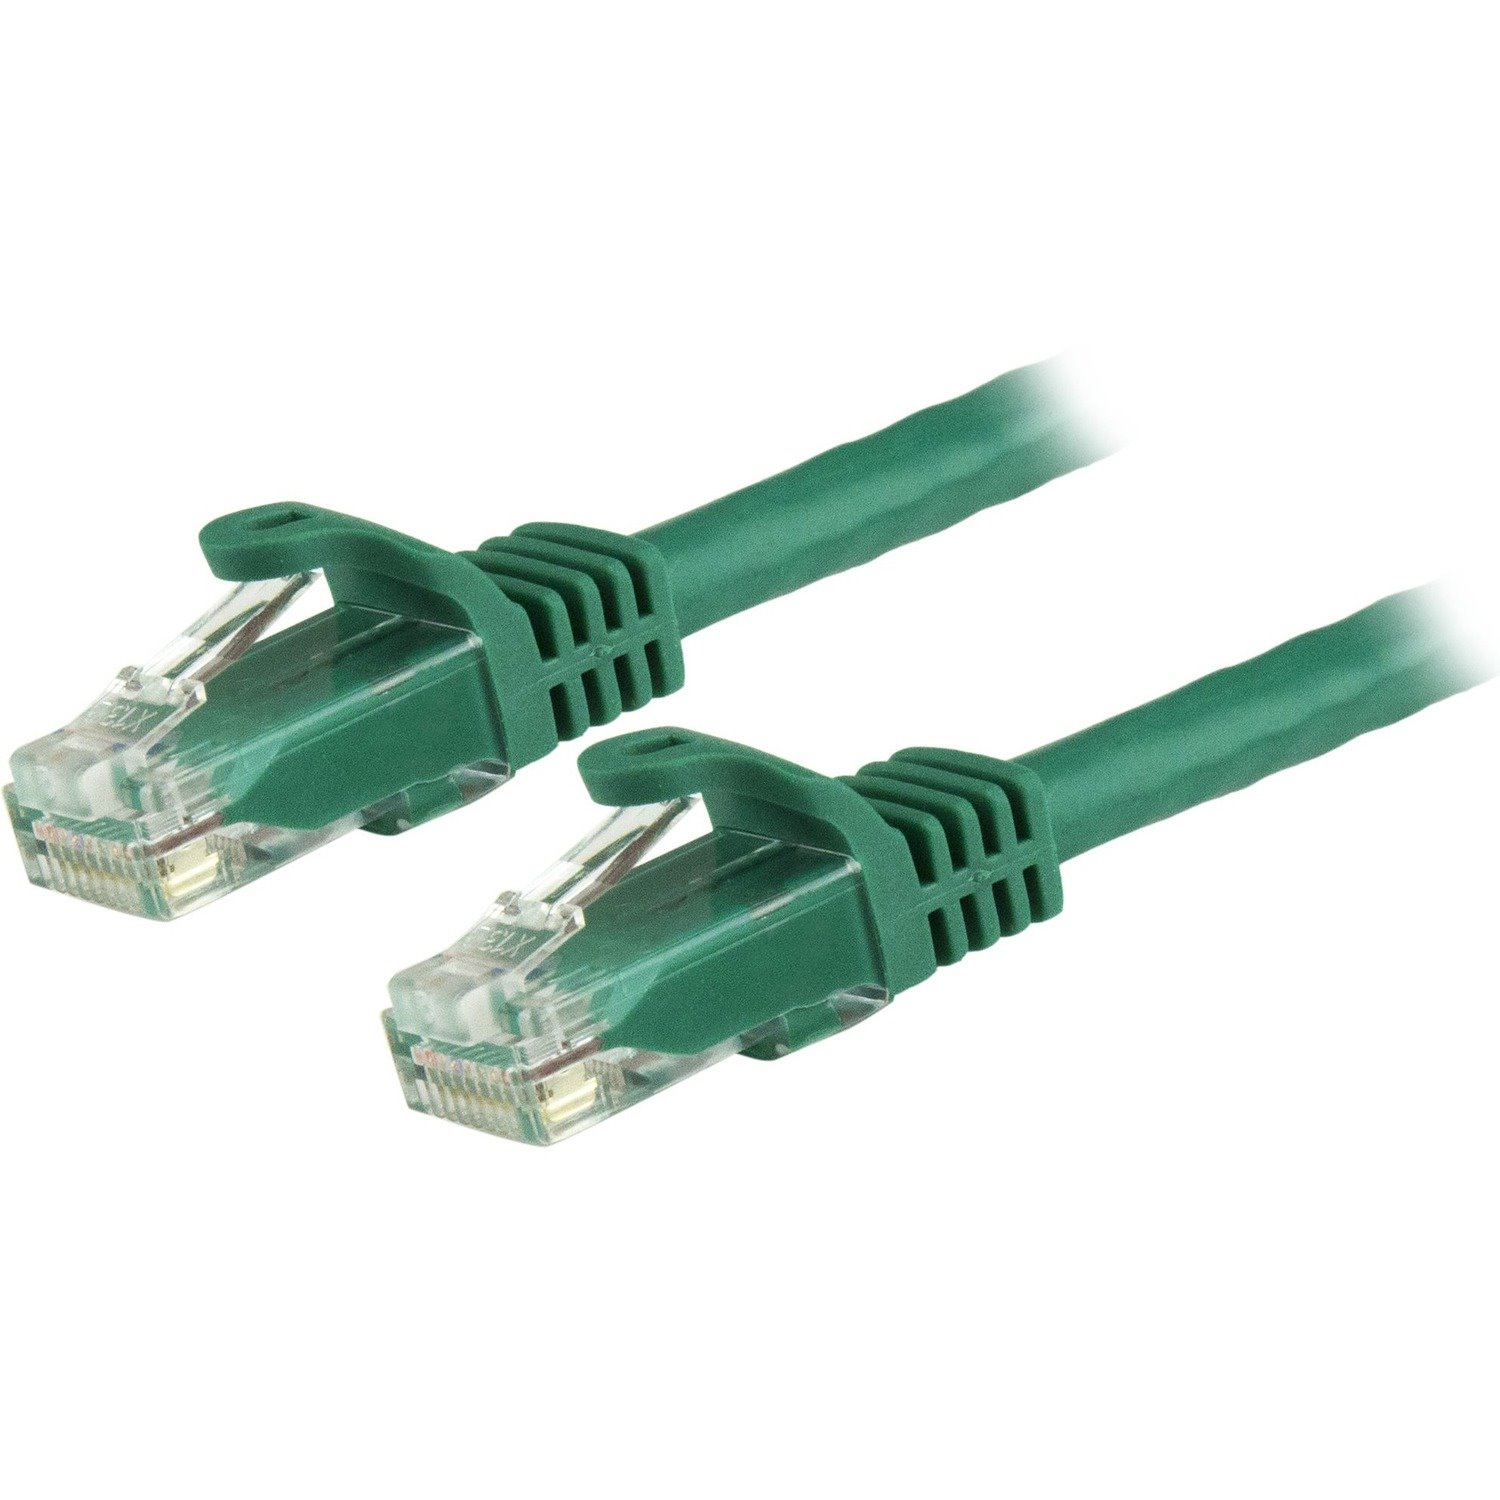 StarTech.com 7 m Category 6 Network Cable for Network Device, Wall Outlet, Workstation, Hub, Distribution Panel, VoIP Device, Security Device - 1